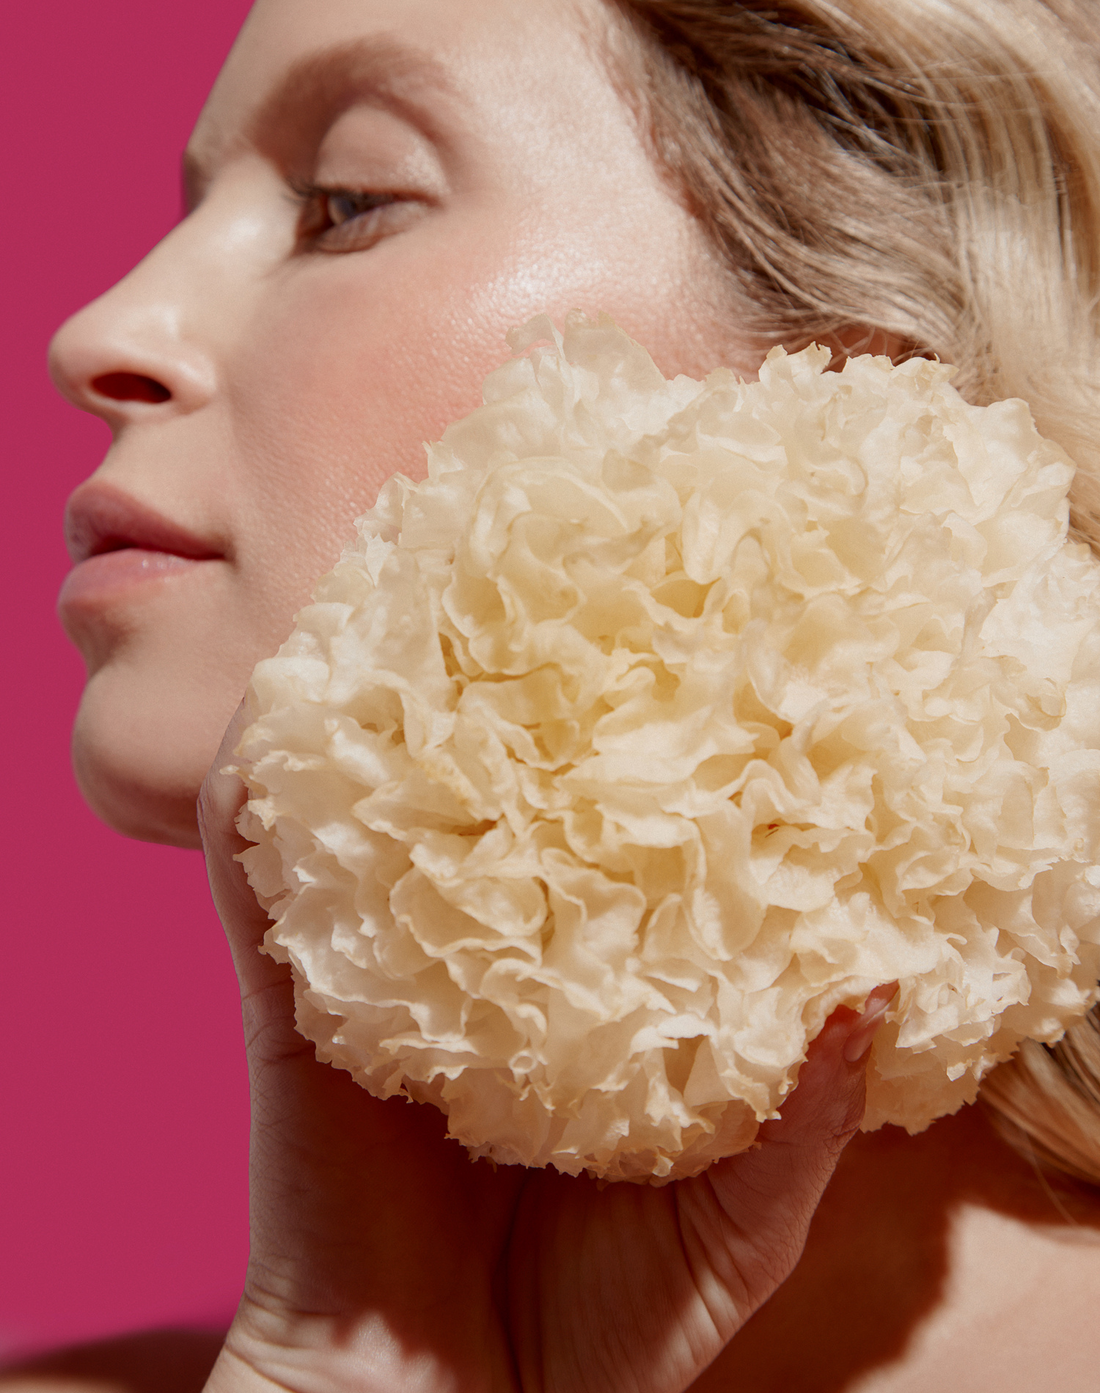 Tremella Mushrooms: The Beauty Secret for Plump, Hydrated Skin